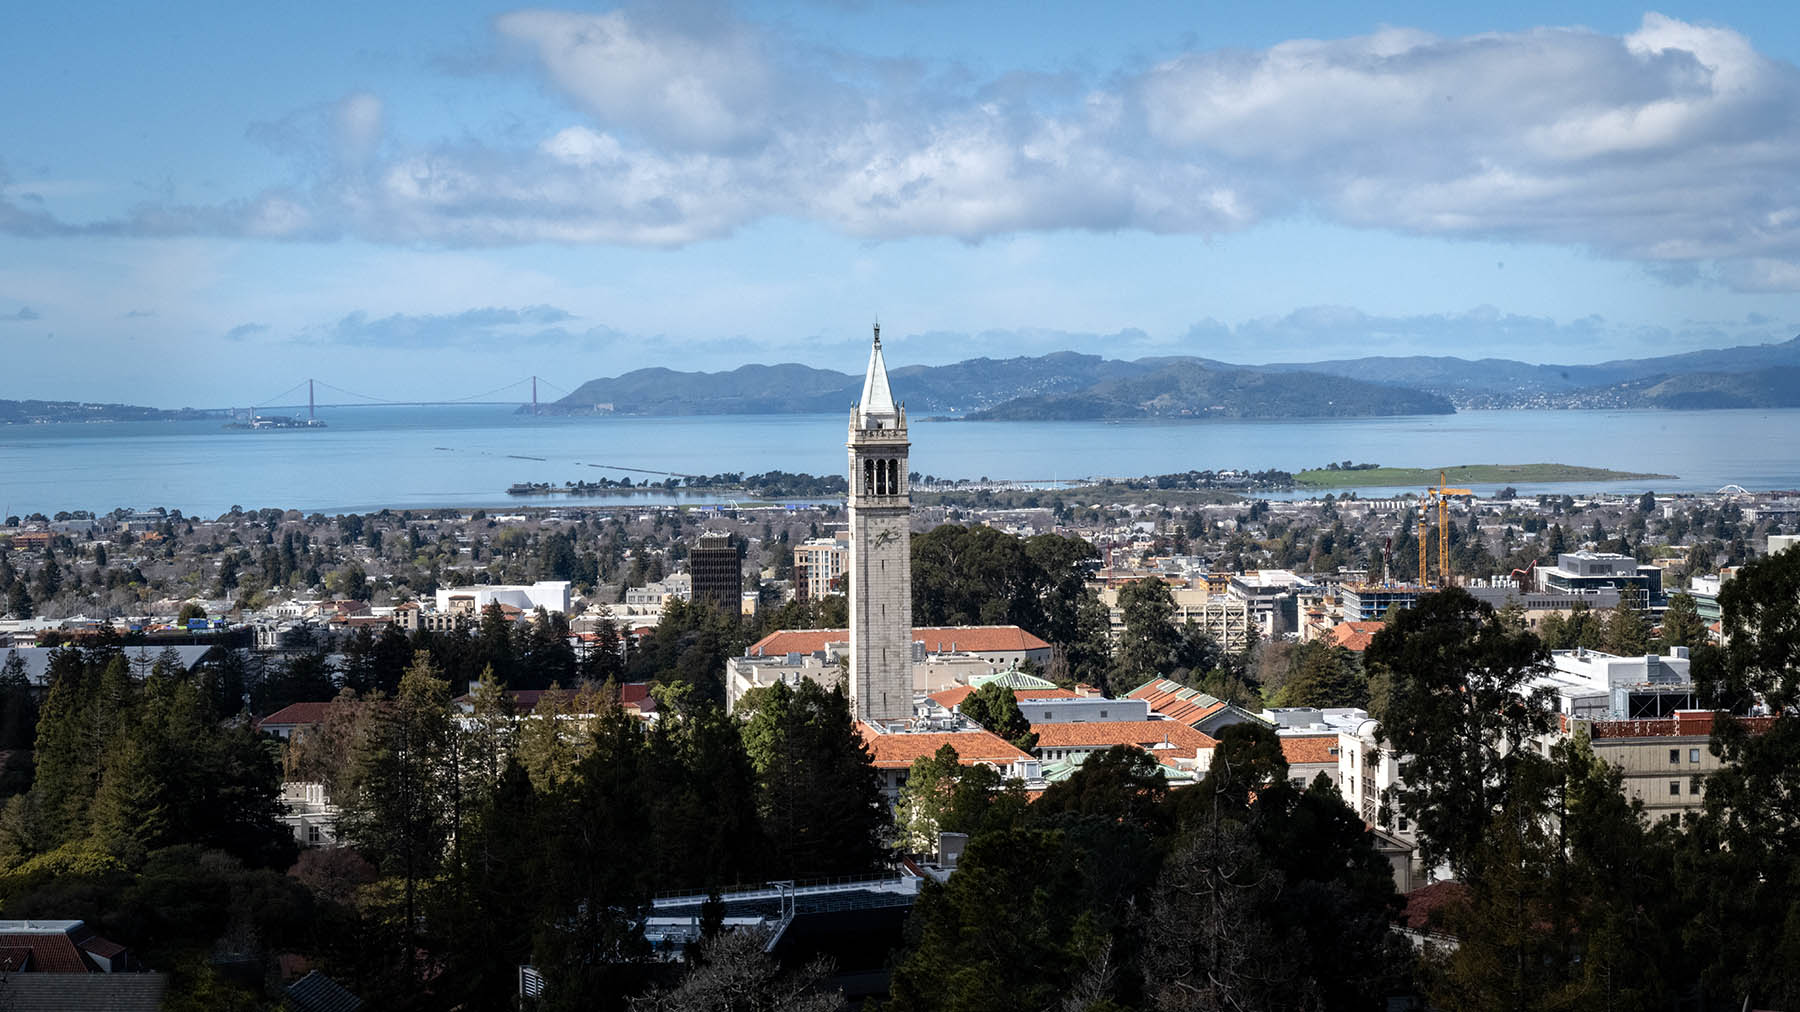 A overarching view of campus looking from above towards the Campanile with the bay and the Golden Gate Bridge in the background